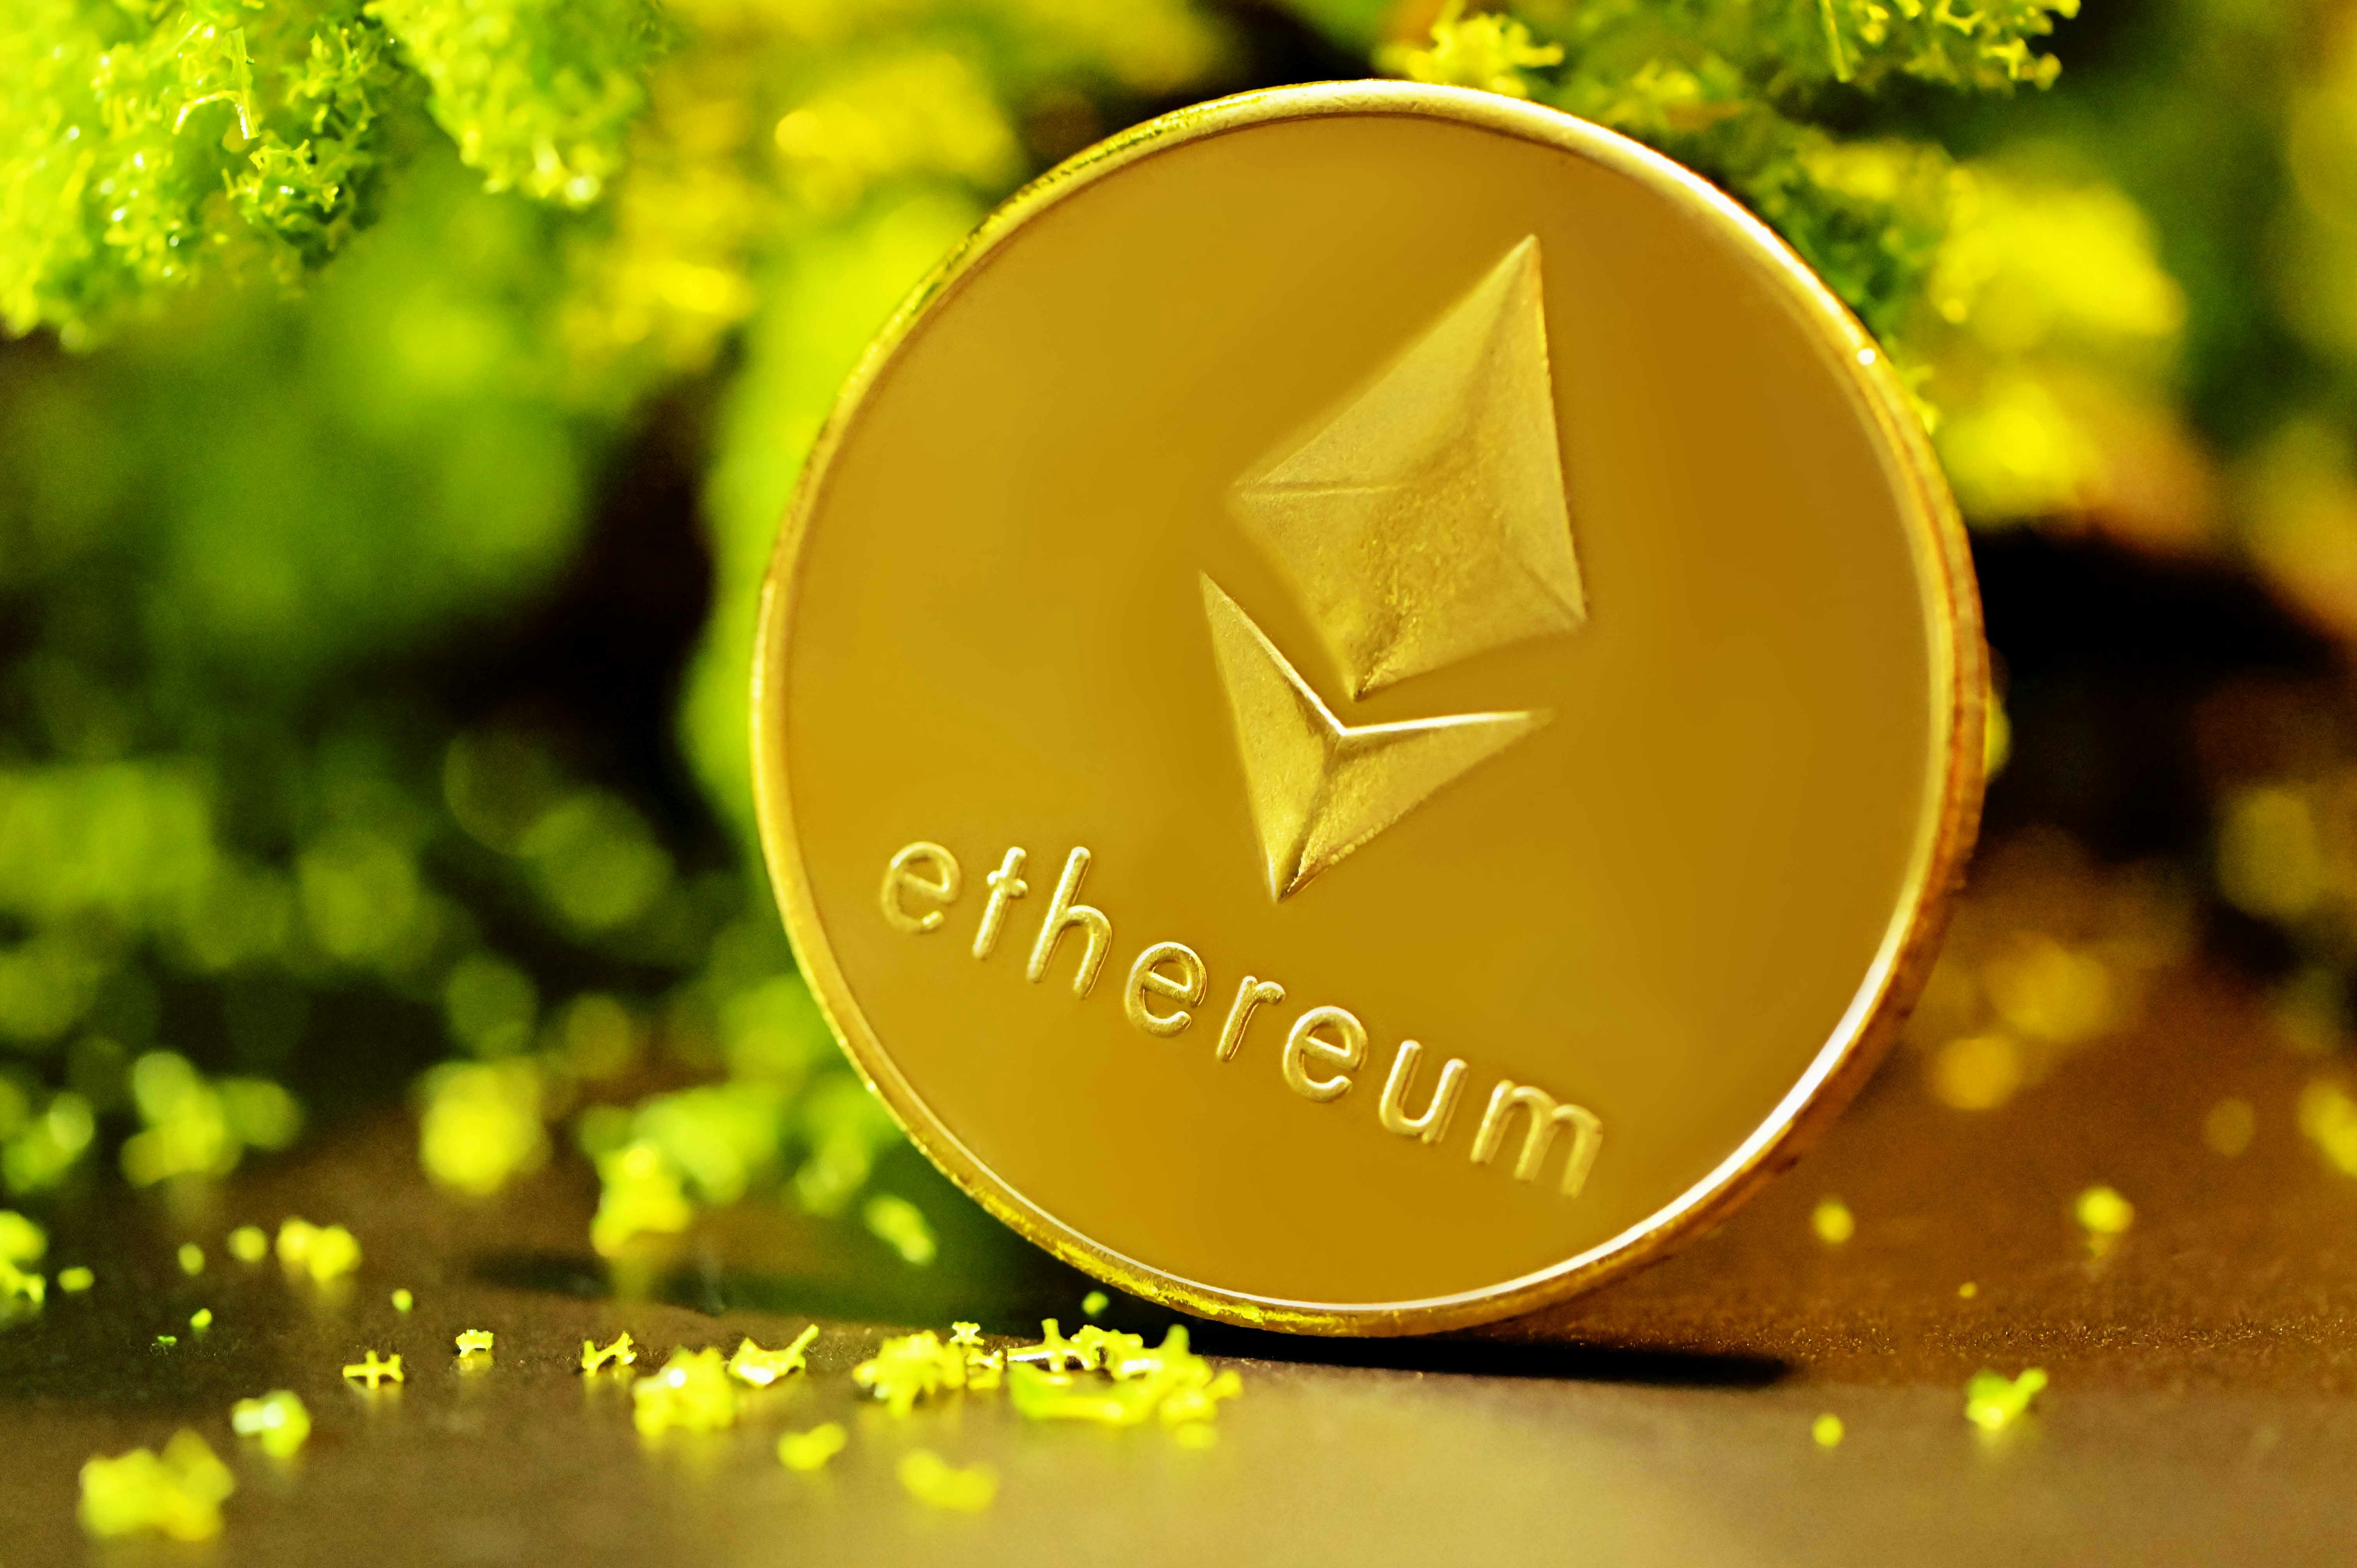 An Ethereum coin underneath a tree branch.